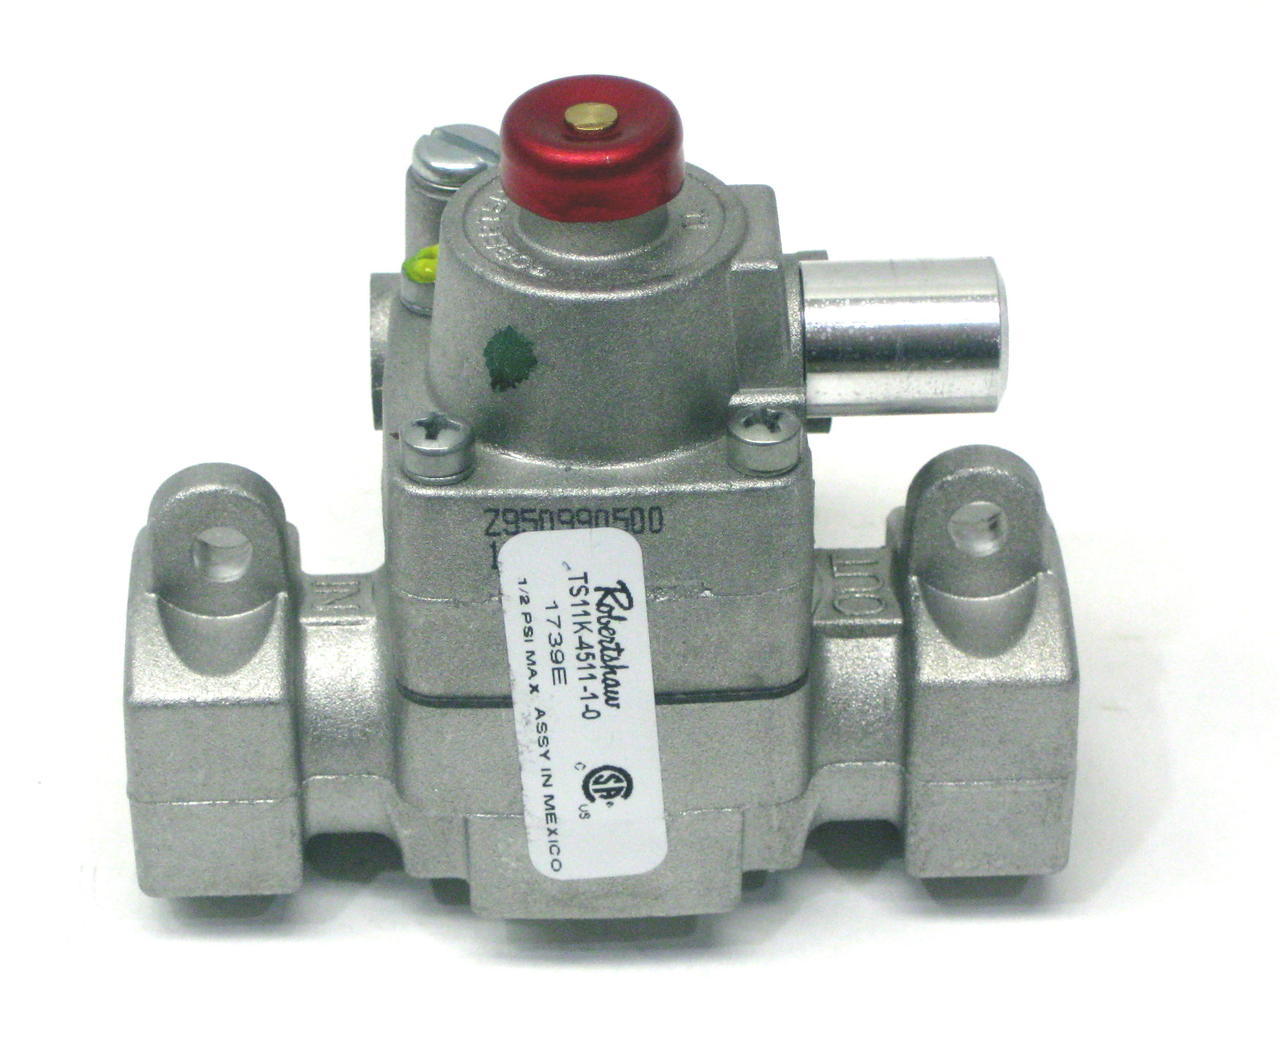 Robertshaw VS 4060 104 MSA Commercial Oven Safety Valve 